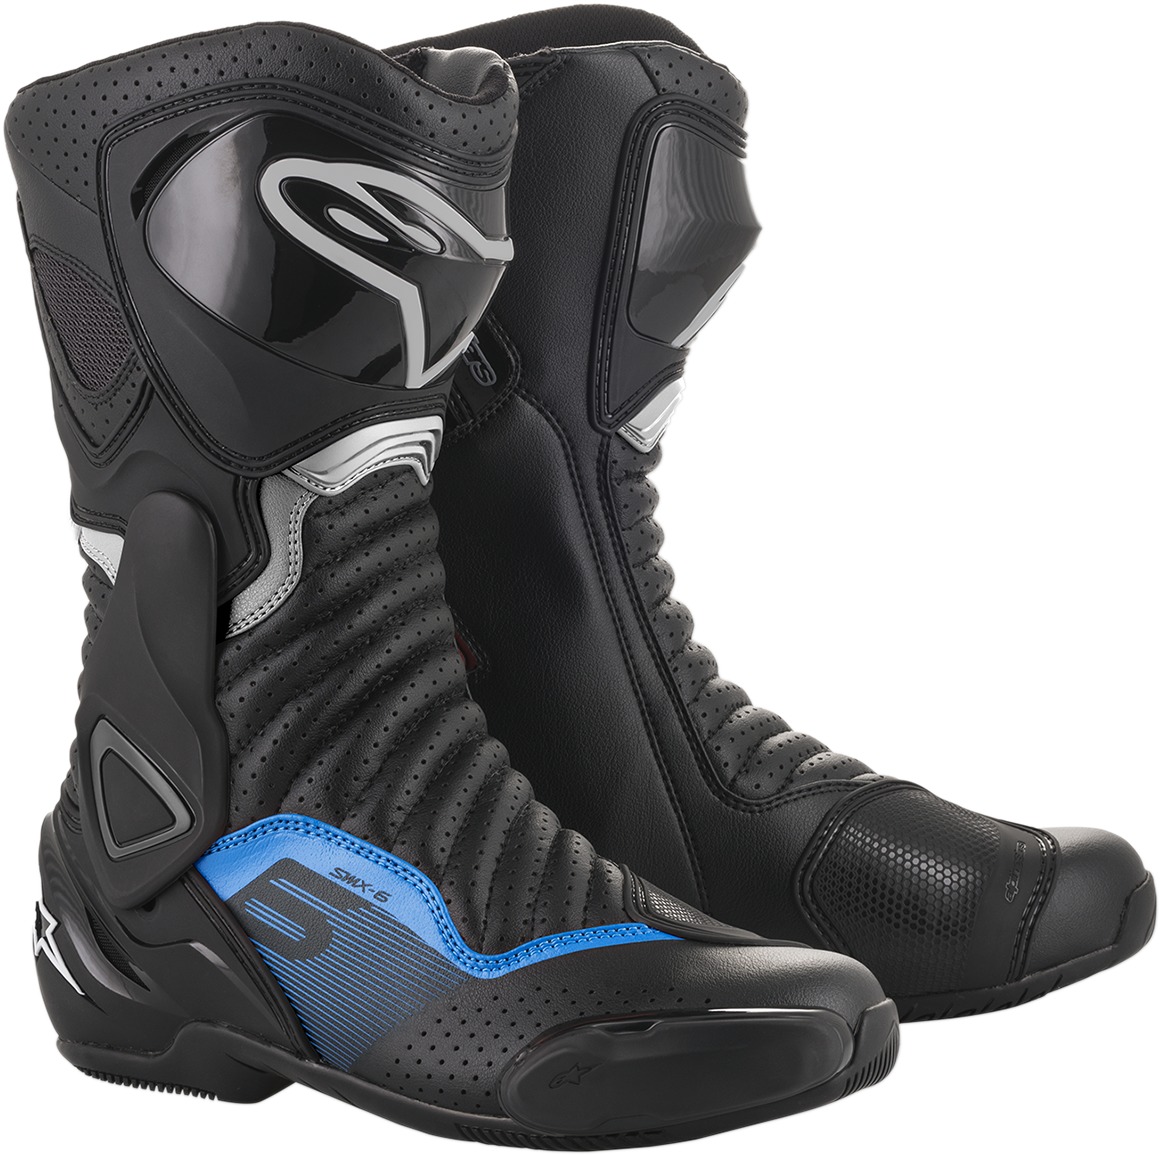 SMX-6 v2 Street Riding Boots Black/Blue/Gray/White US 12 - Click Image to Close